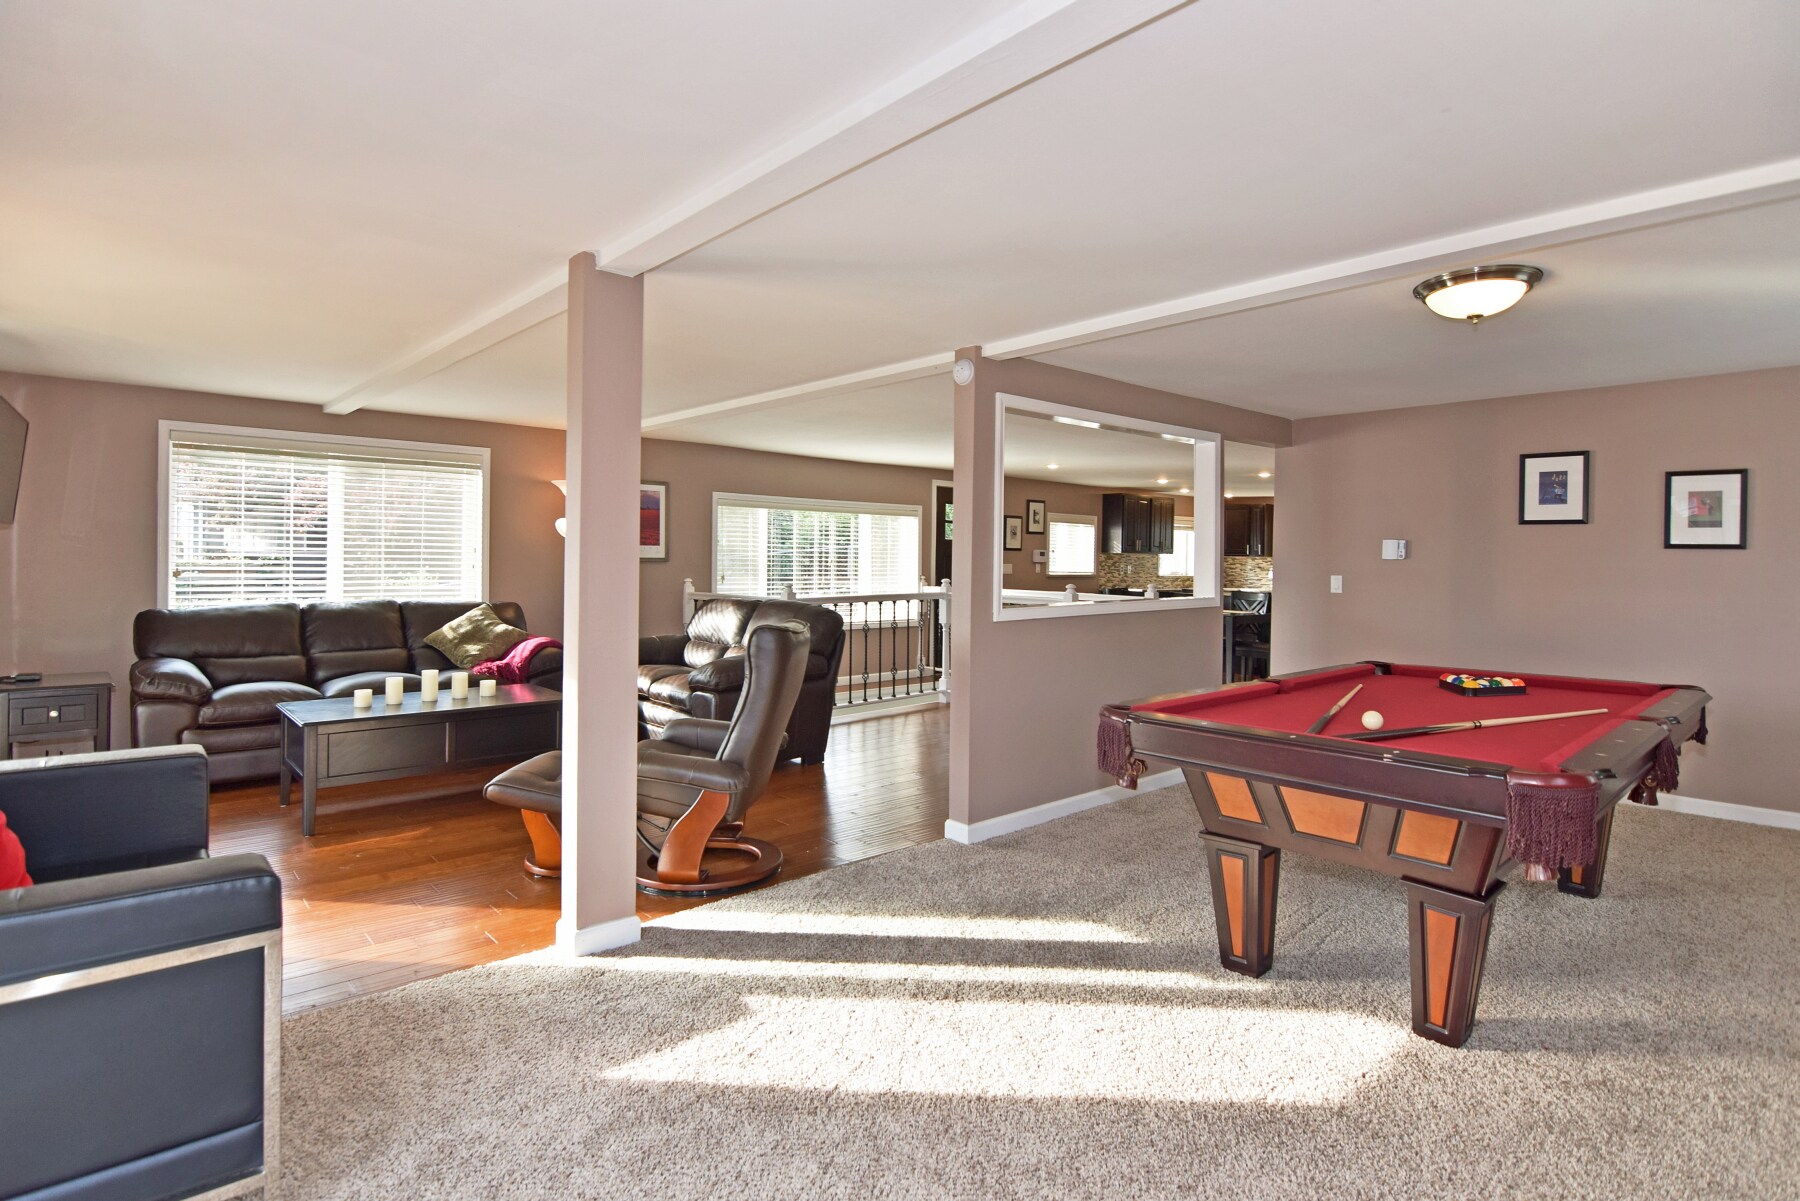 Gather in the game room for a round of pool.